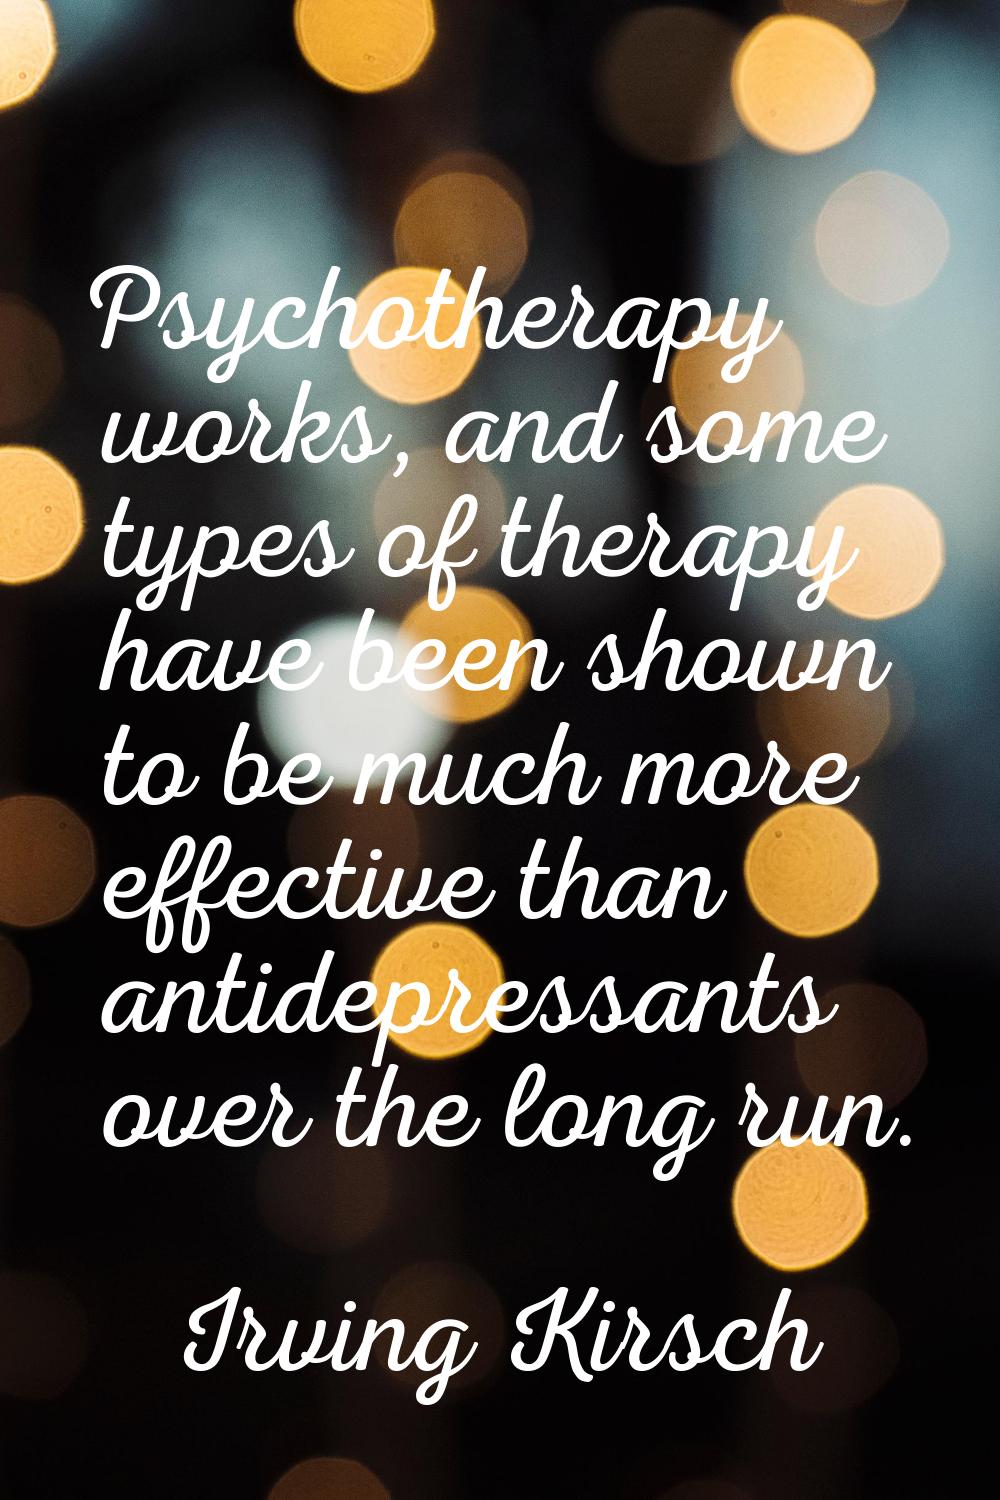 Psychotherapy works, and some types of therapy have been shown to be much more effective than antid